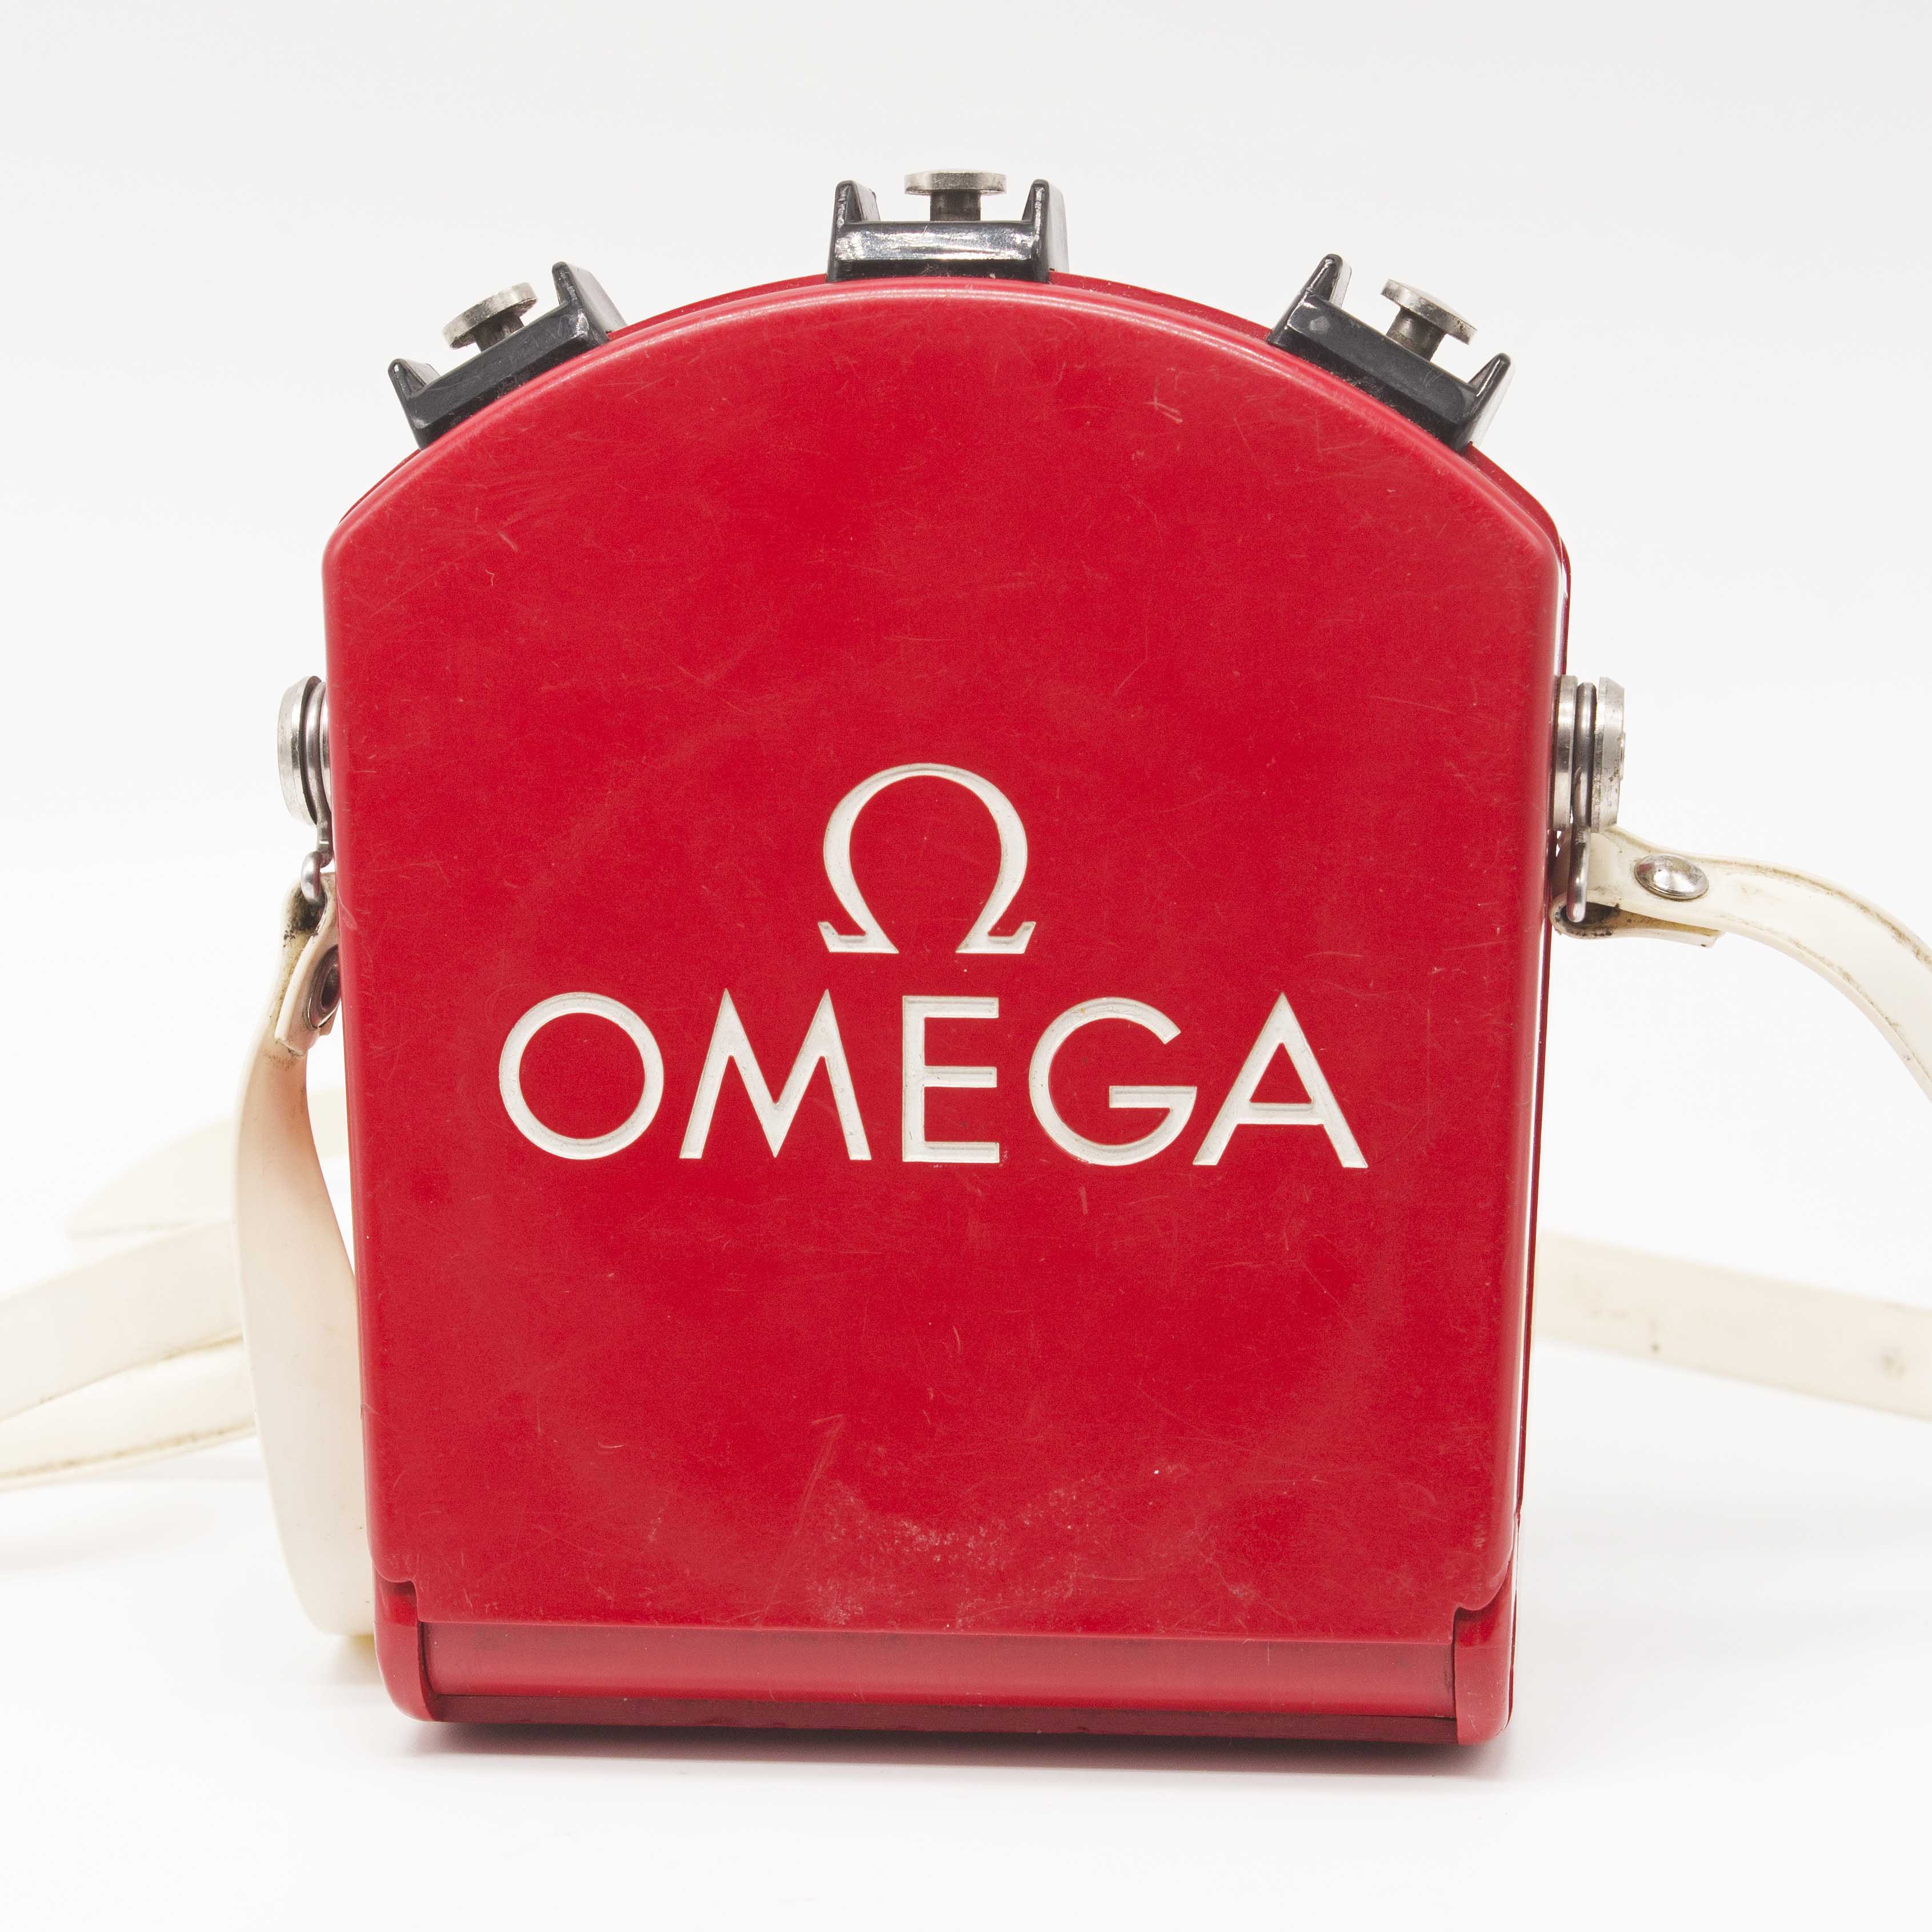 AN OMEGA SPLIT SECONDS CHRONOGRAPH TIMER IN ORIGINAL FITTED PLASTIC CASE WITH SHOULDER STRAP CIRCA - Image 2 of 5